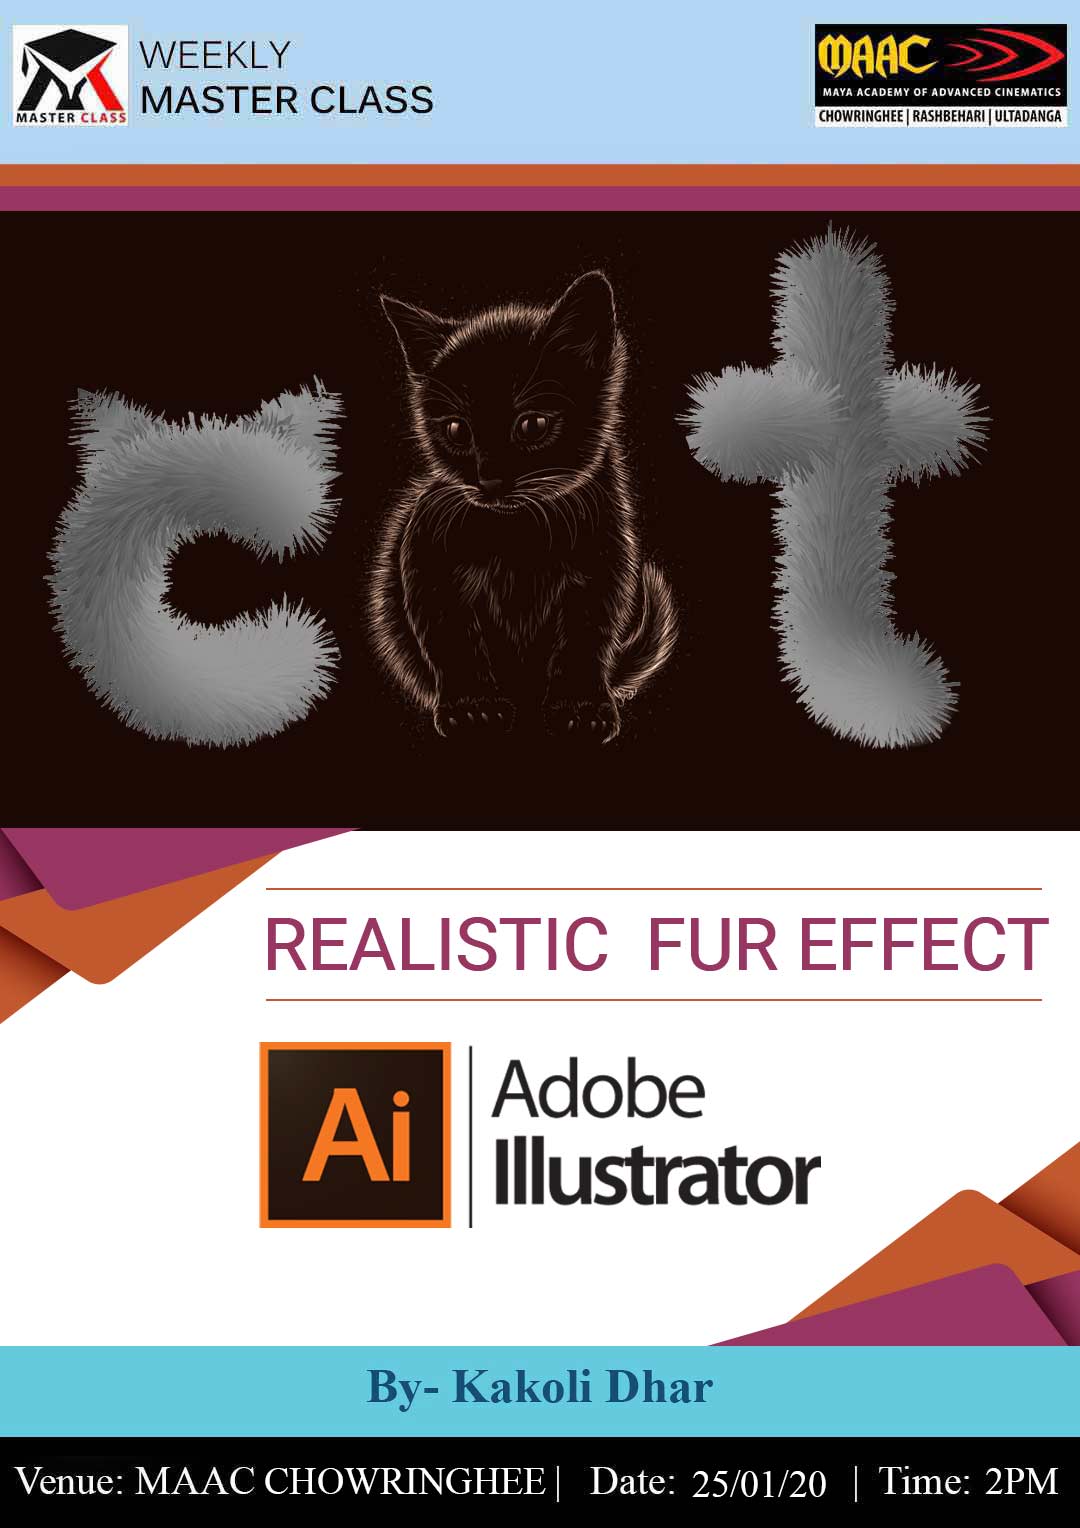 Weekly Master Class on Realistic Fur Effect